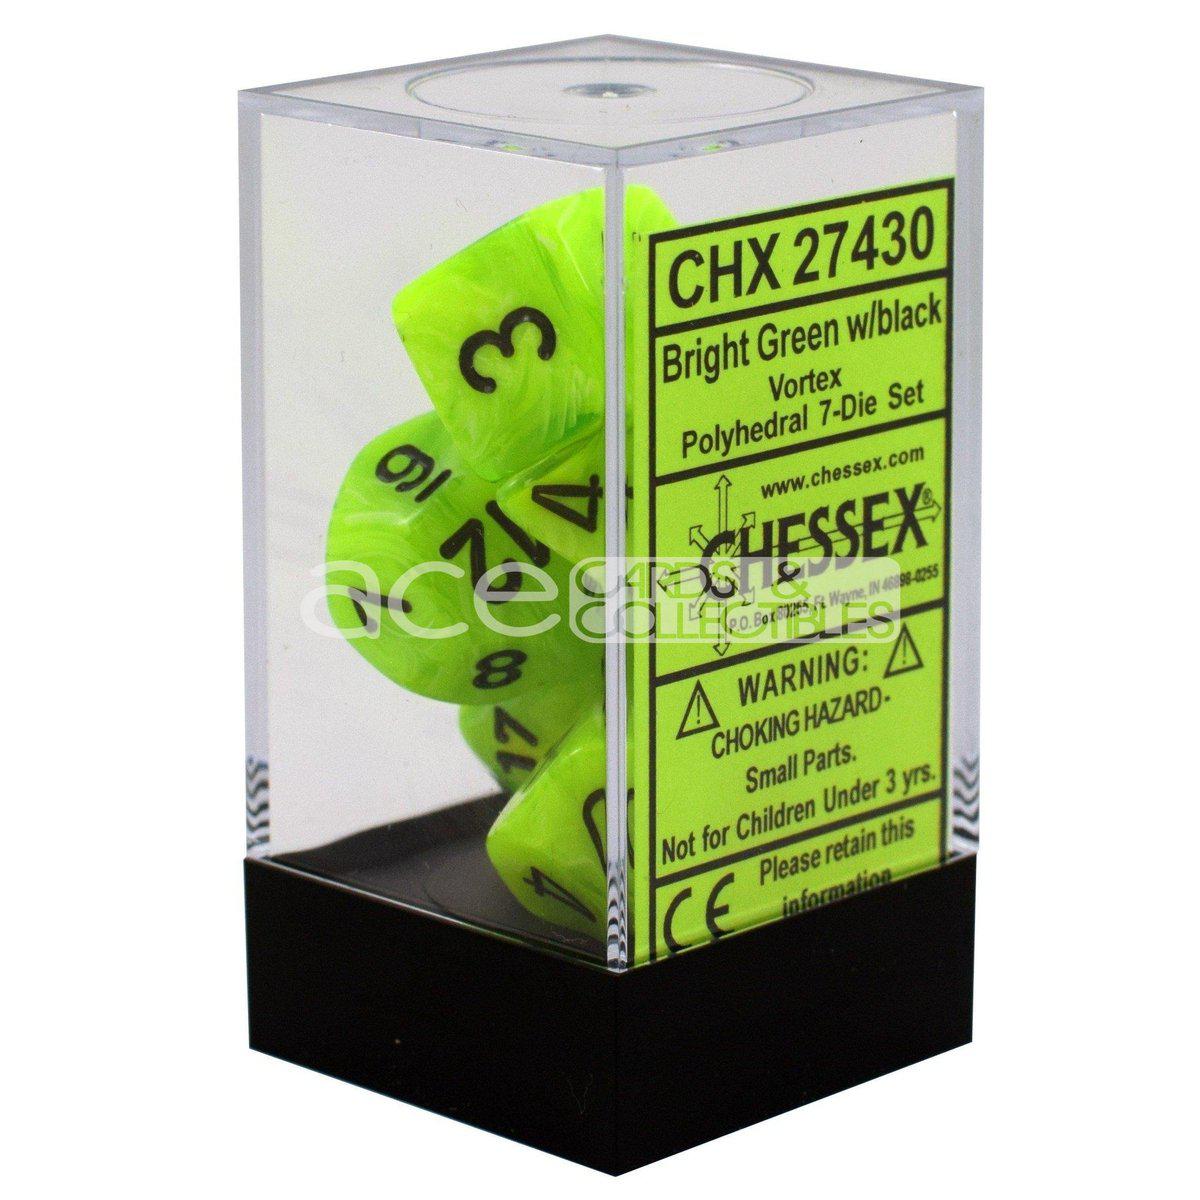 Chessex Vortex Polyhedral 7pcs Dice (Bright Green/Black) [CHX27430]-Chessex-Ace Cards & Collectibles